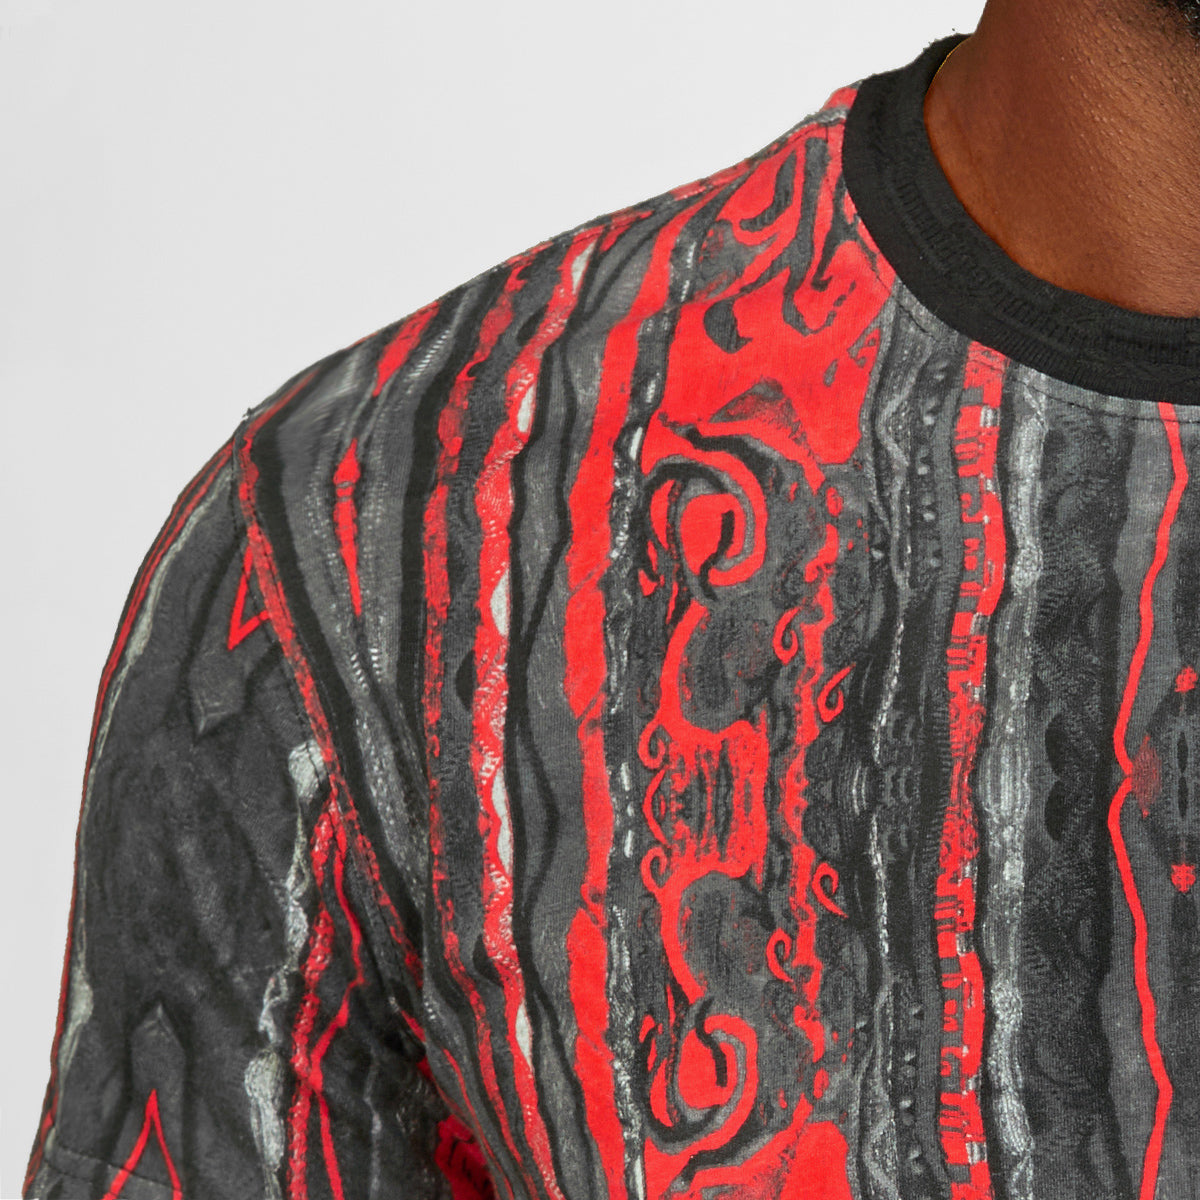 COOGI CLASSIC RED-BLACK ALL-OVER CREW NECK TEE